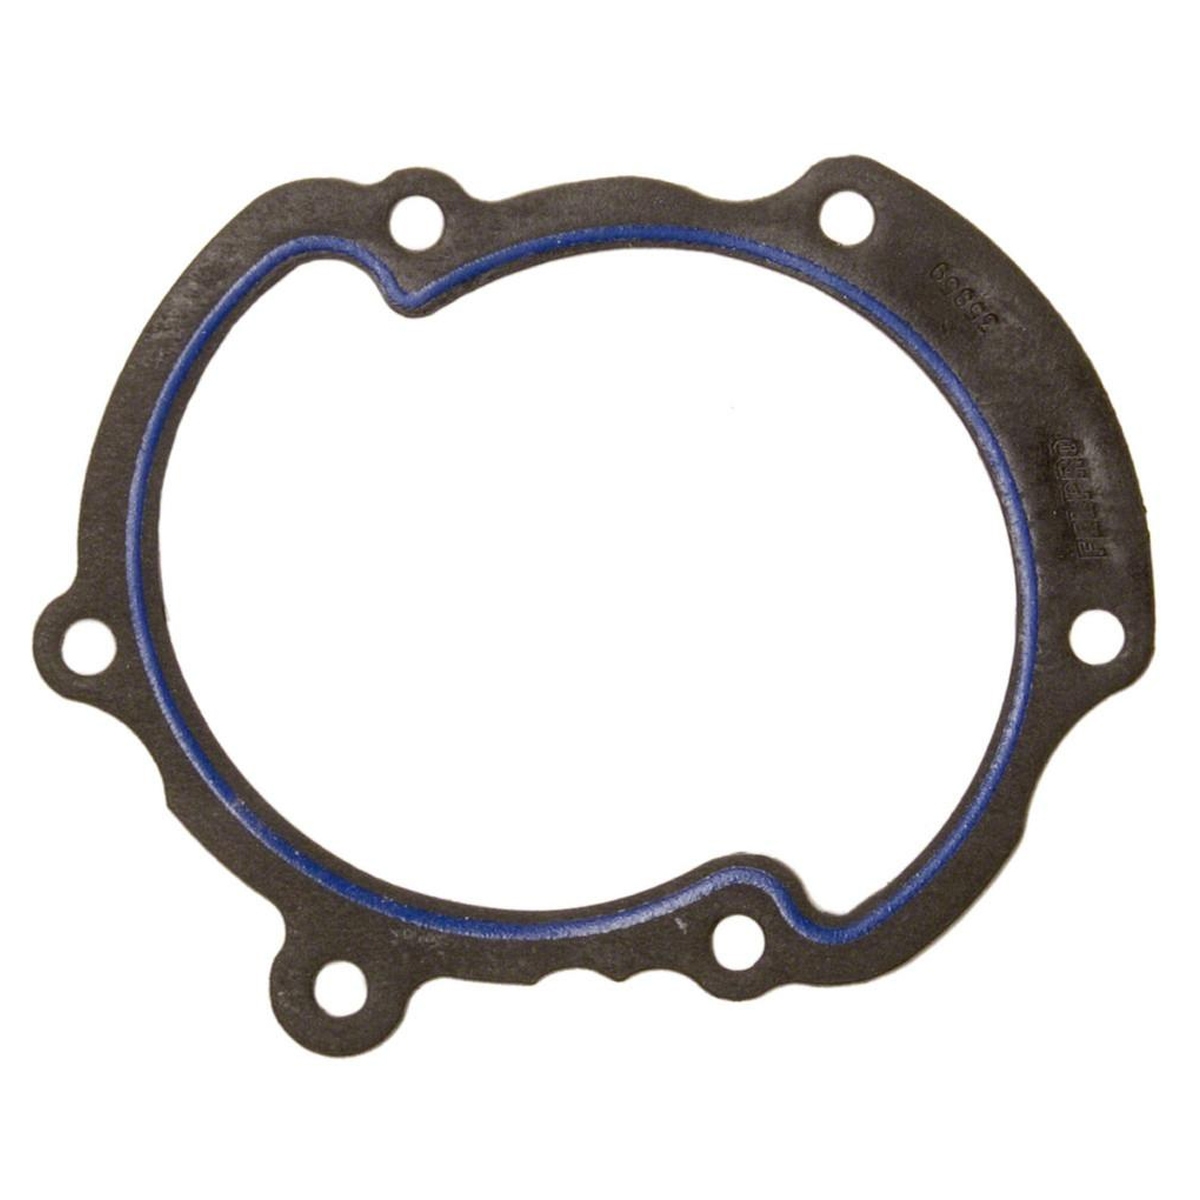 VAUXHALL AND OPEL CHEVETTE Water Pump Gasket